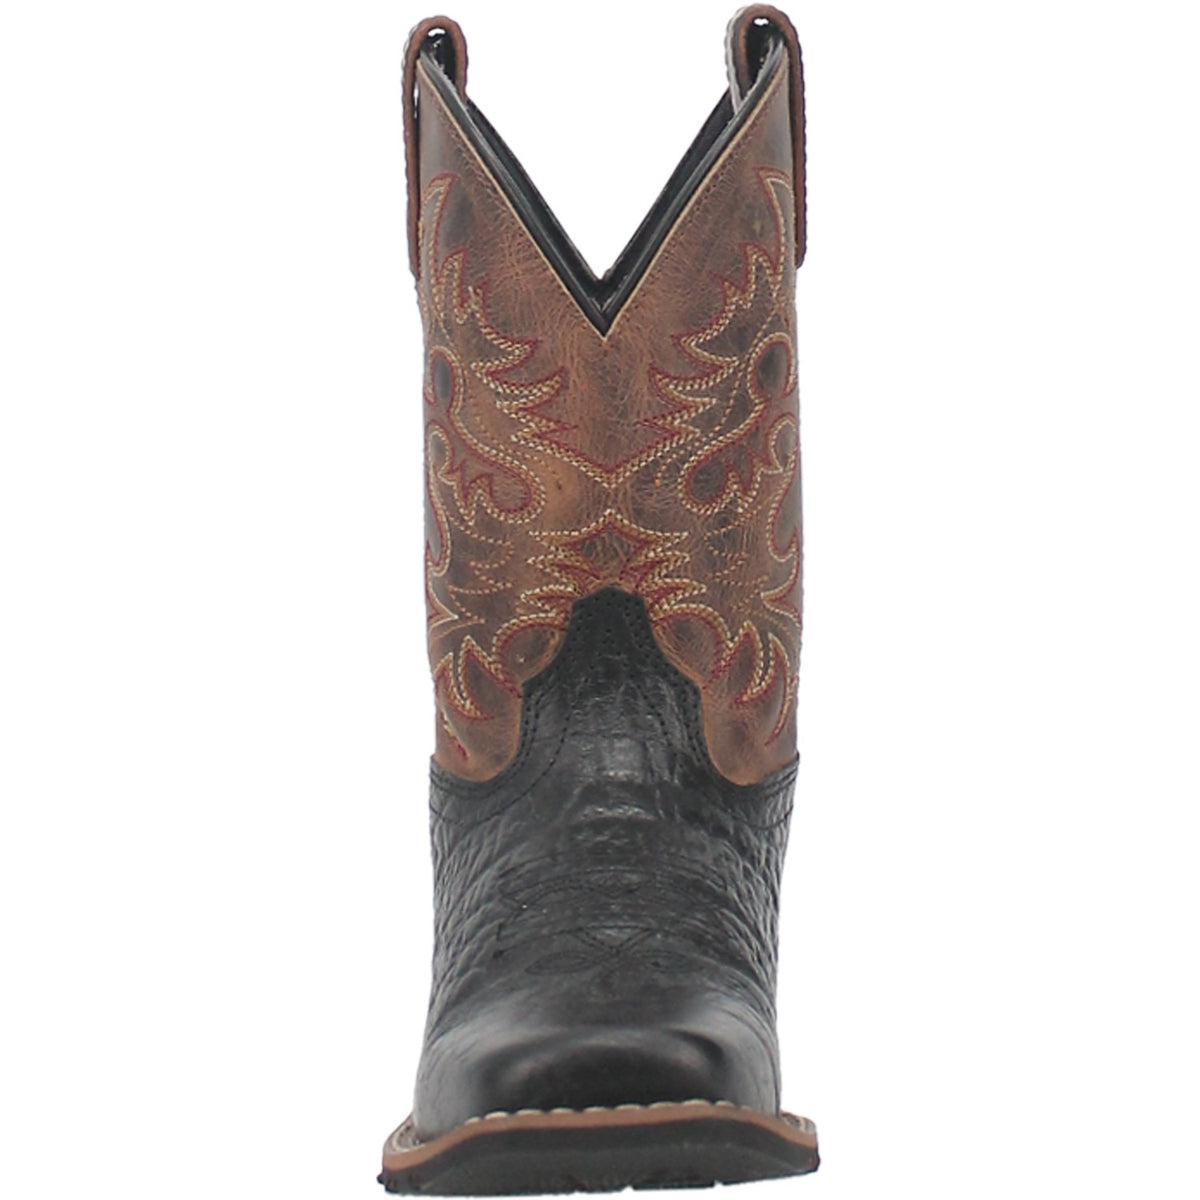 LITTLE RIVER LEATHER CHILDREN'S BOOT Cover